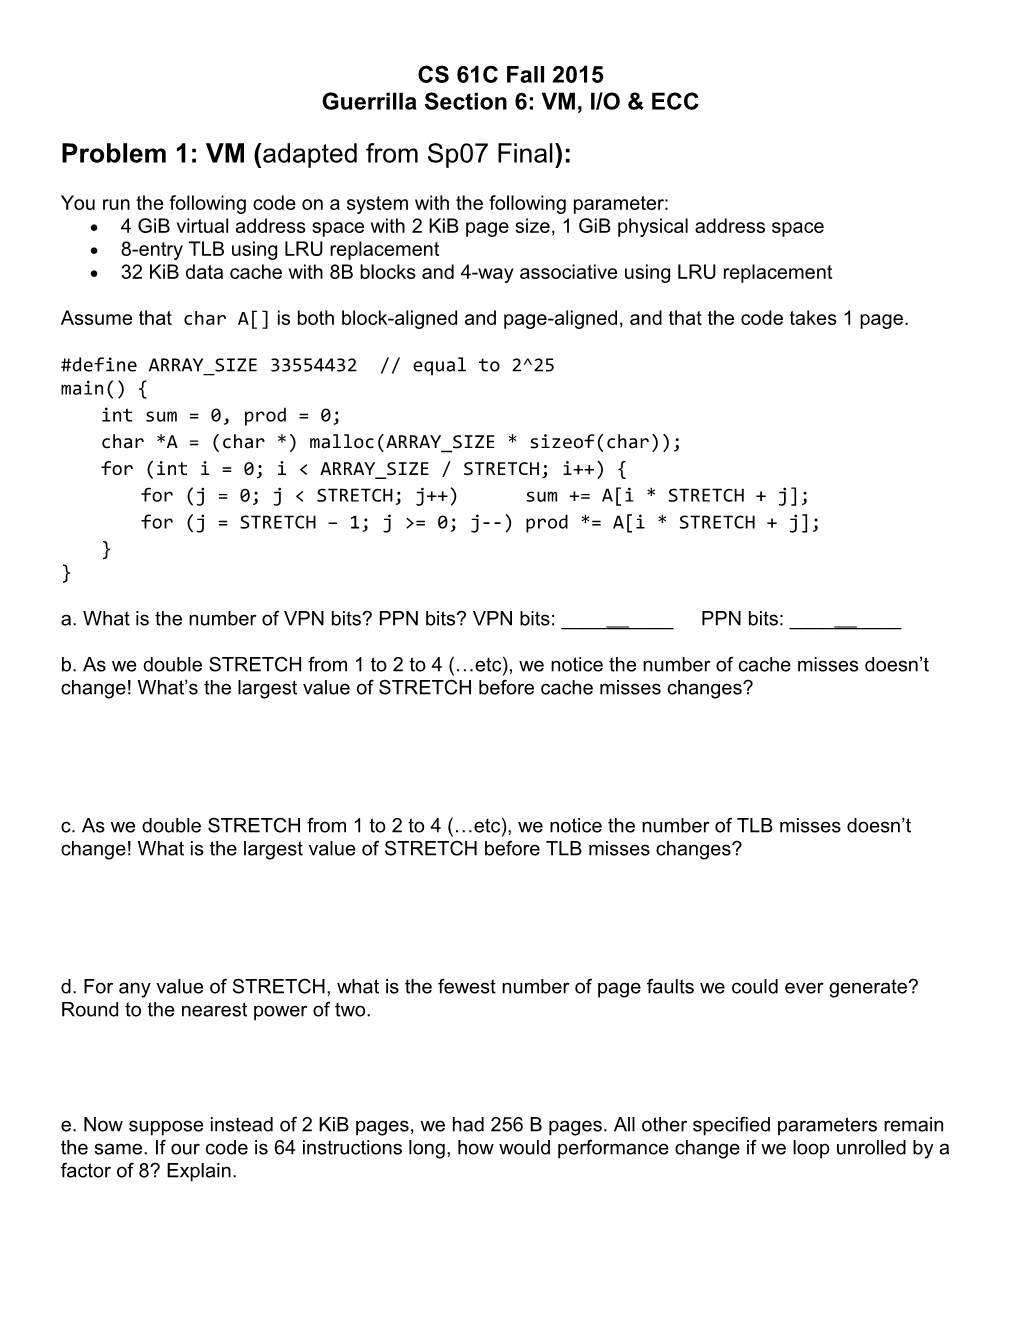 Problem 1: VM (Adapted from Sp07 Final)